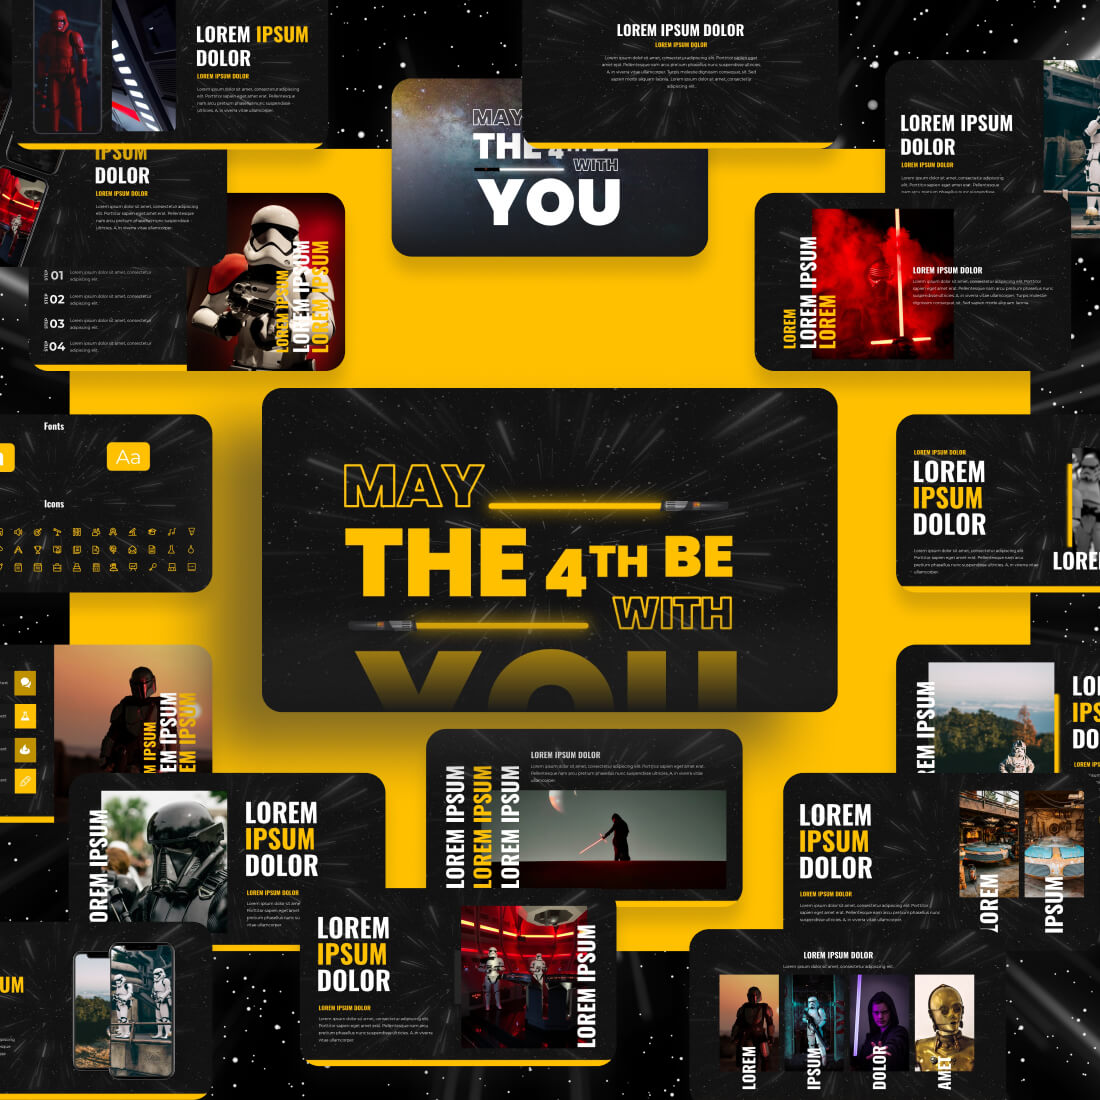 May4th Star Wars Google Slides Theme preview image.